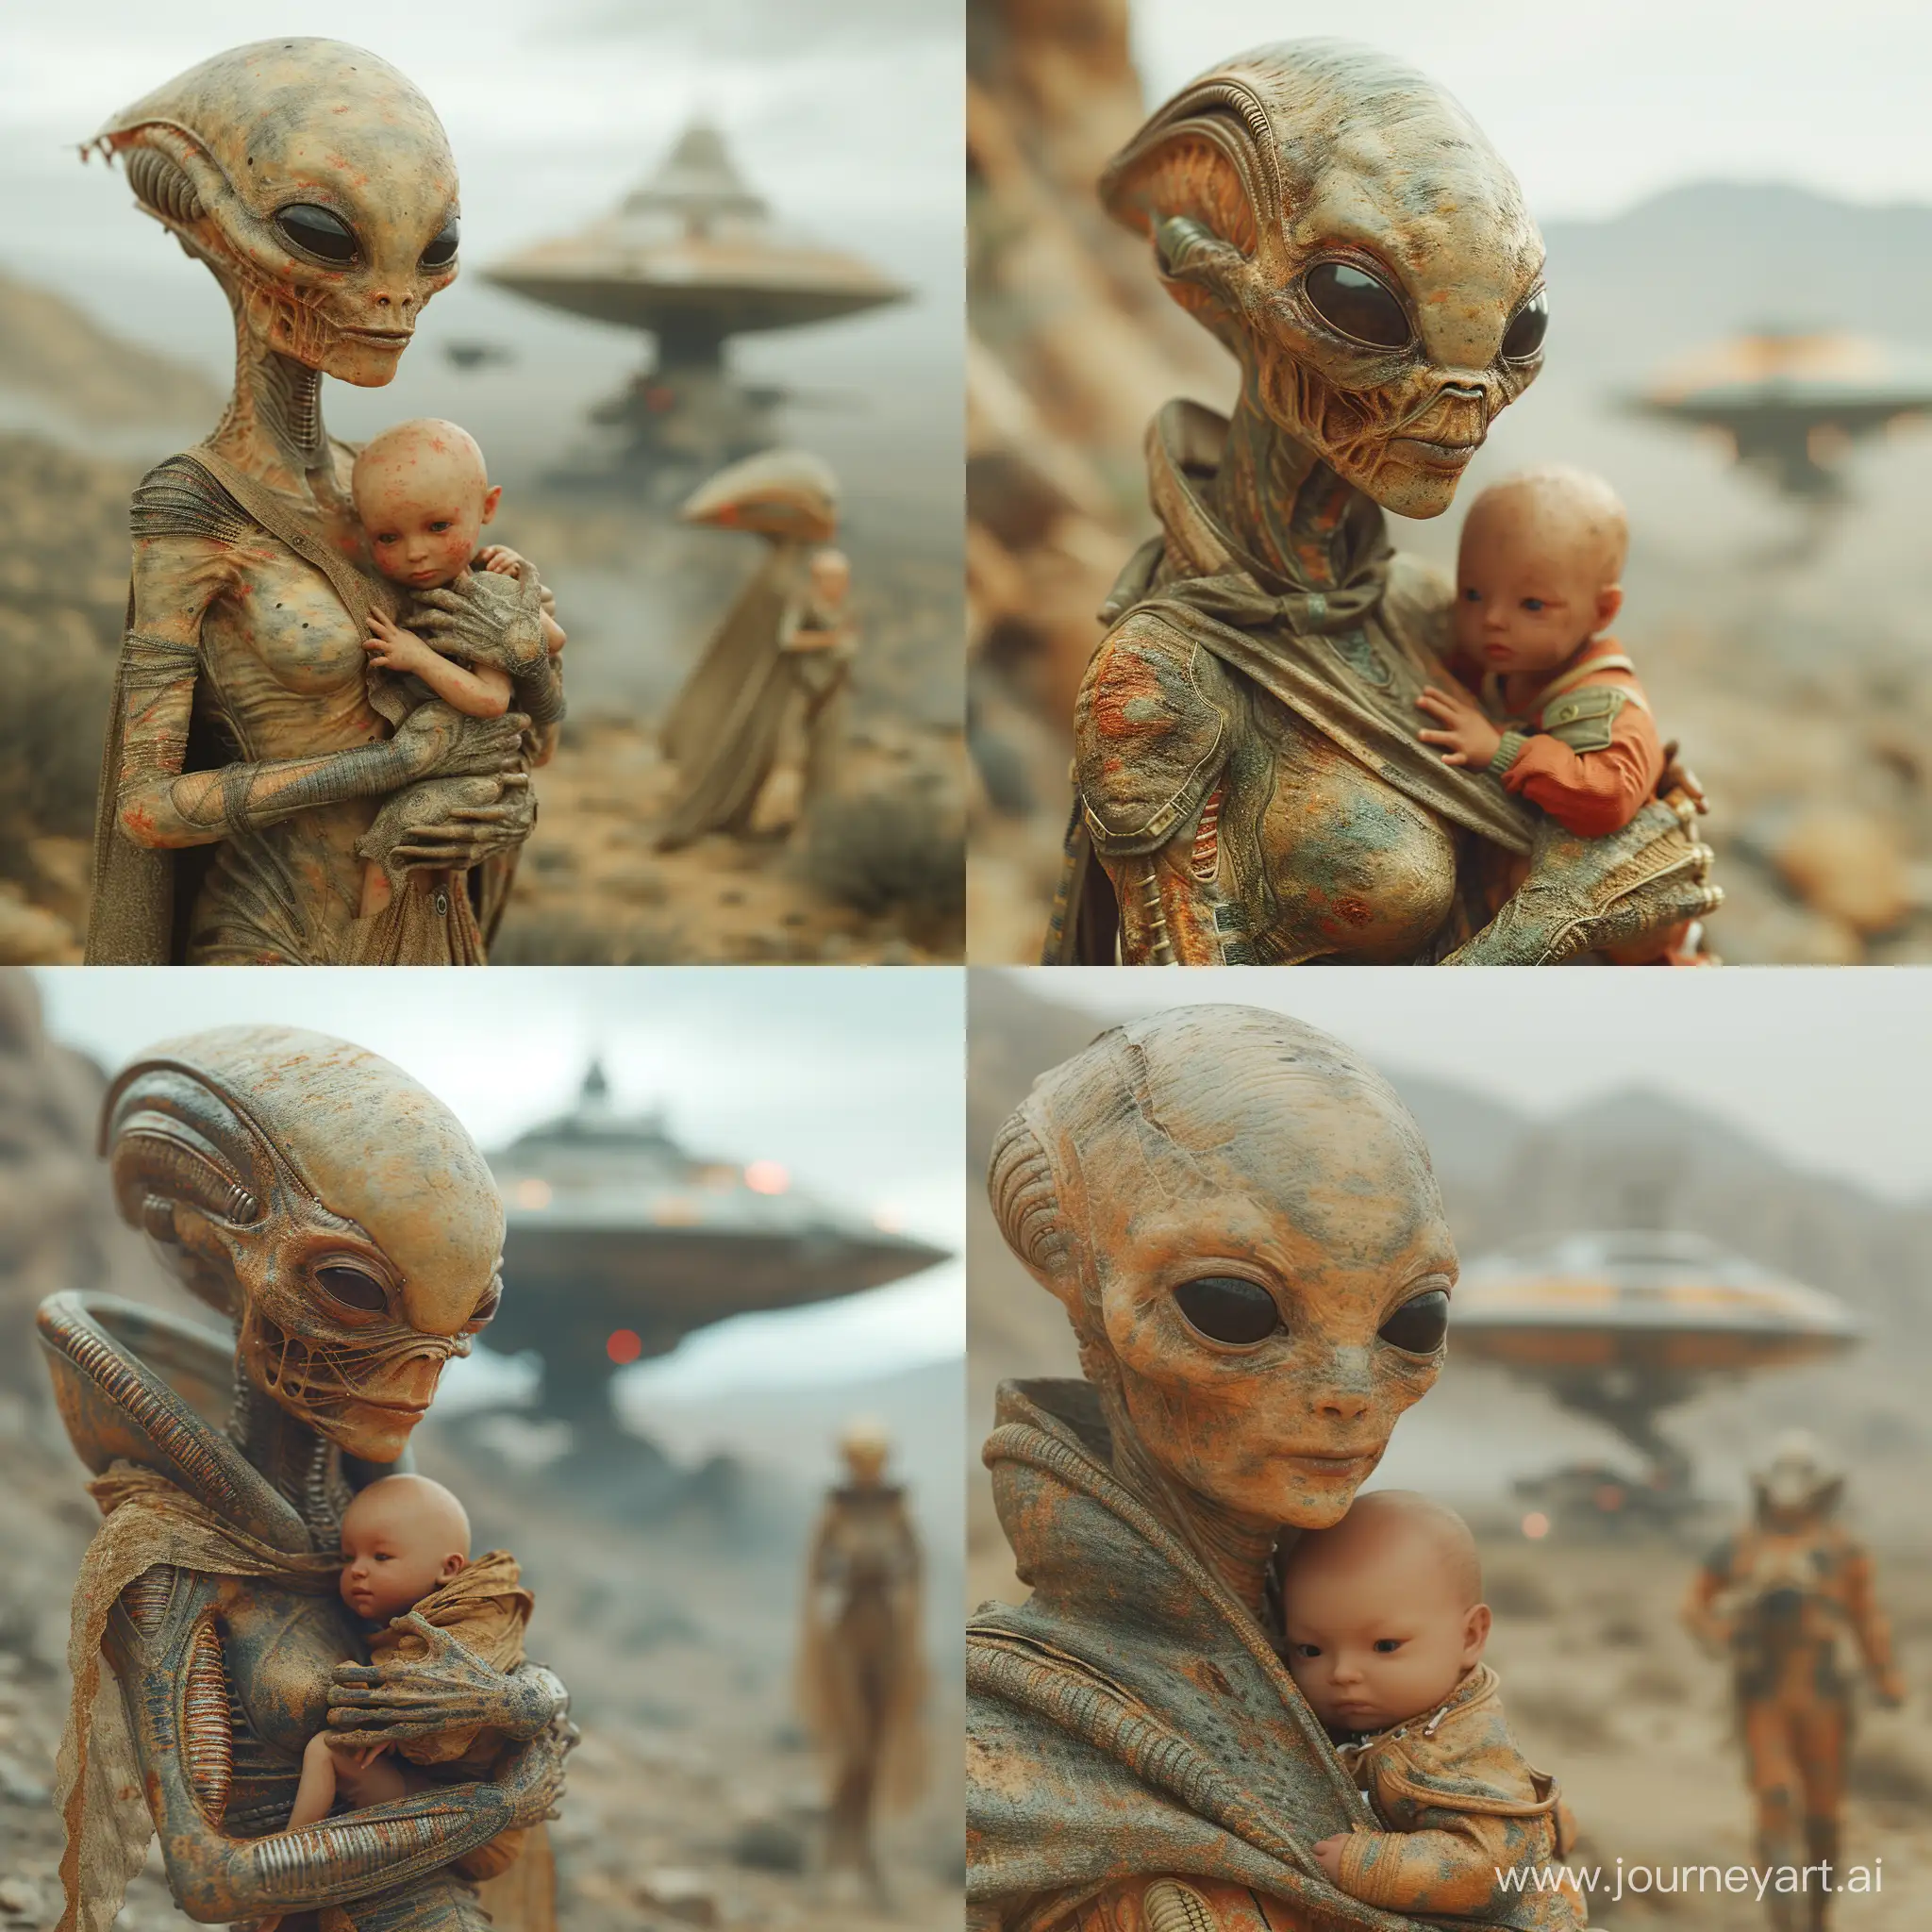 Alien-Lovingly-Carrying-Human-Baby-in-Desert-with-Spaceship-Amidst-Fog